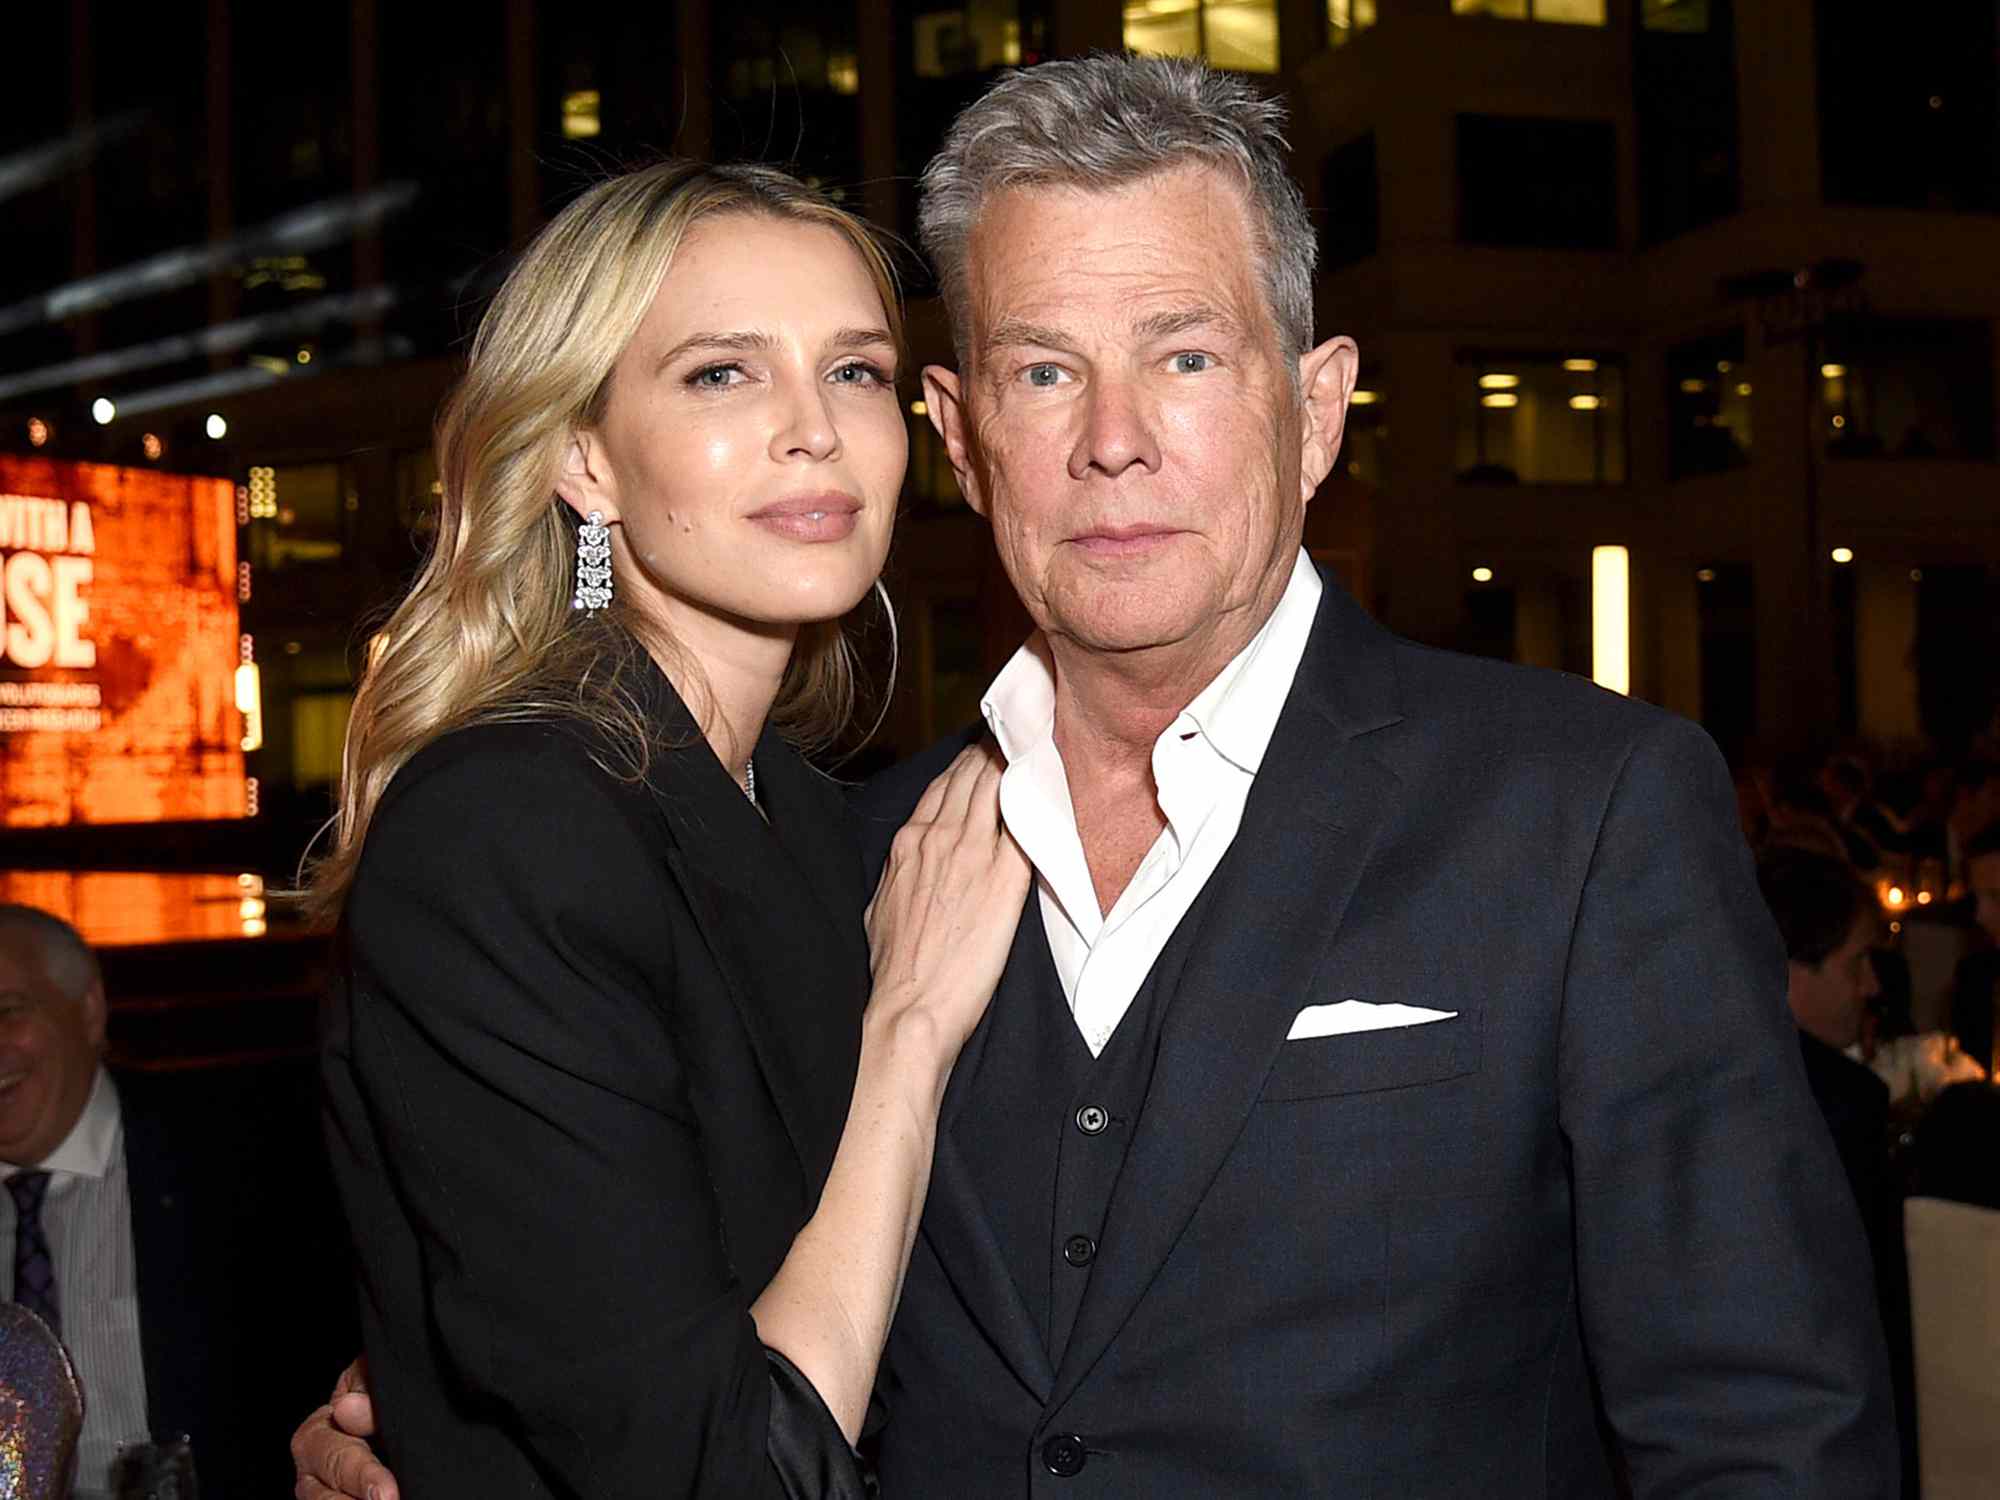 Sara Foster and David Foster attend the Transformative Medicine of USC: Rebels with a Cause GALA at on October 24, 2019 in Santa Monica, California